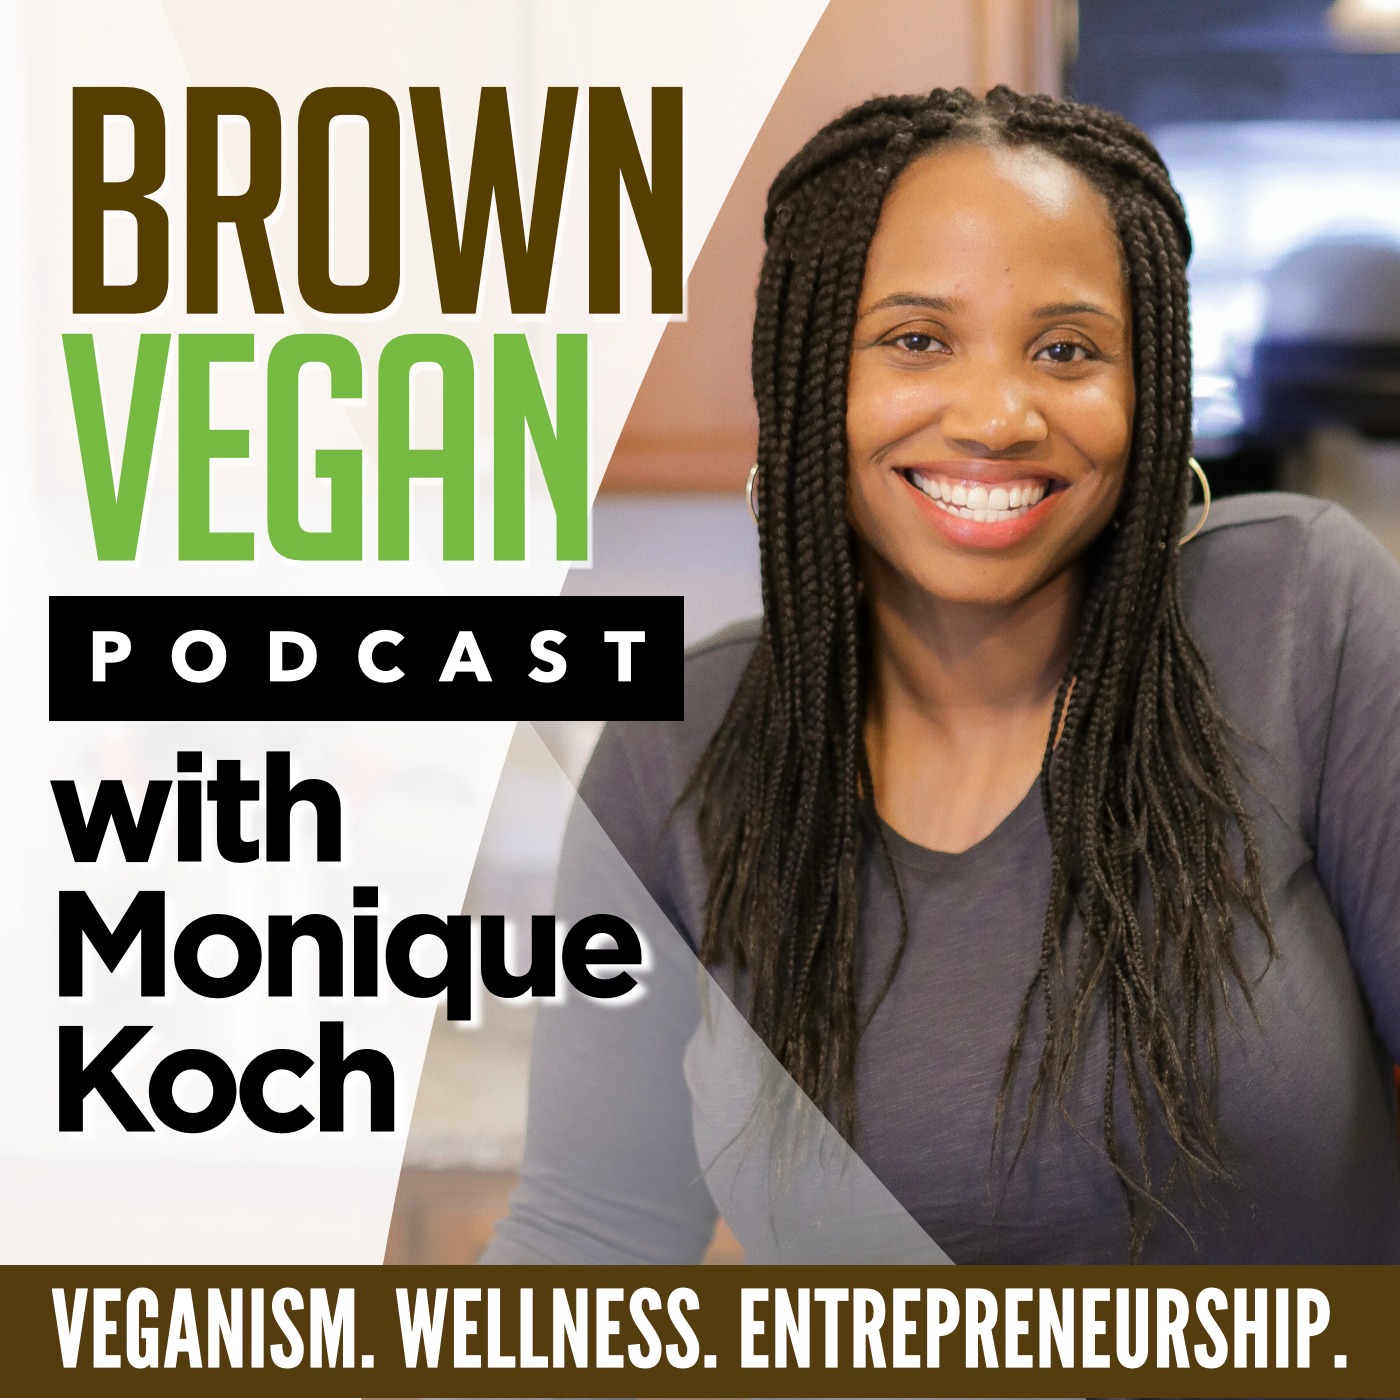 How to Get Back on Track & Vegan Cooking with Vegan Eats DMV